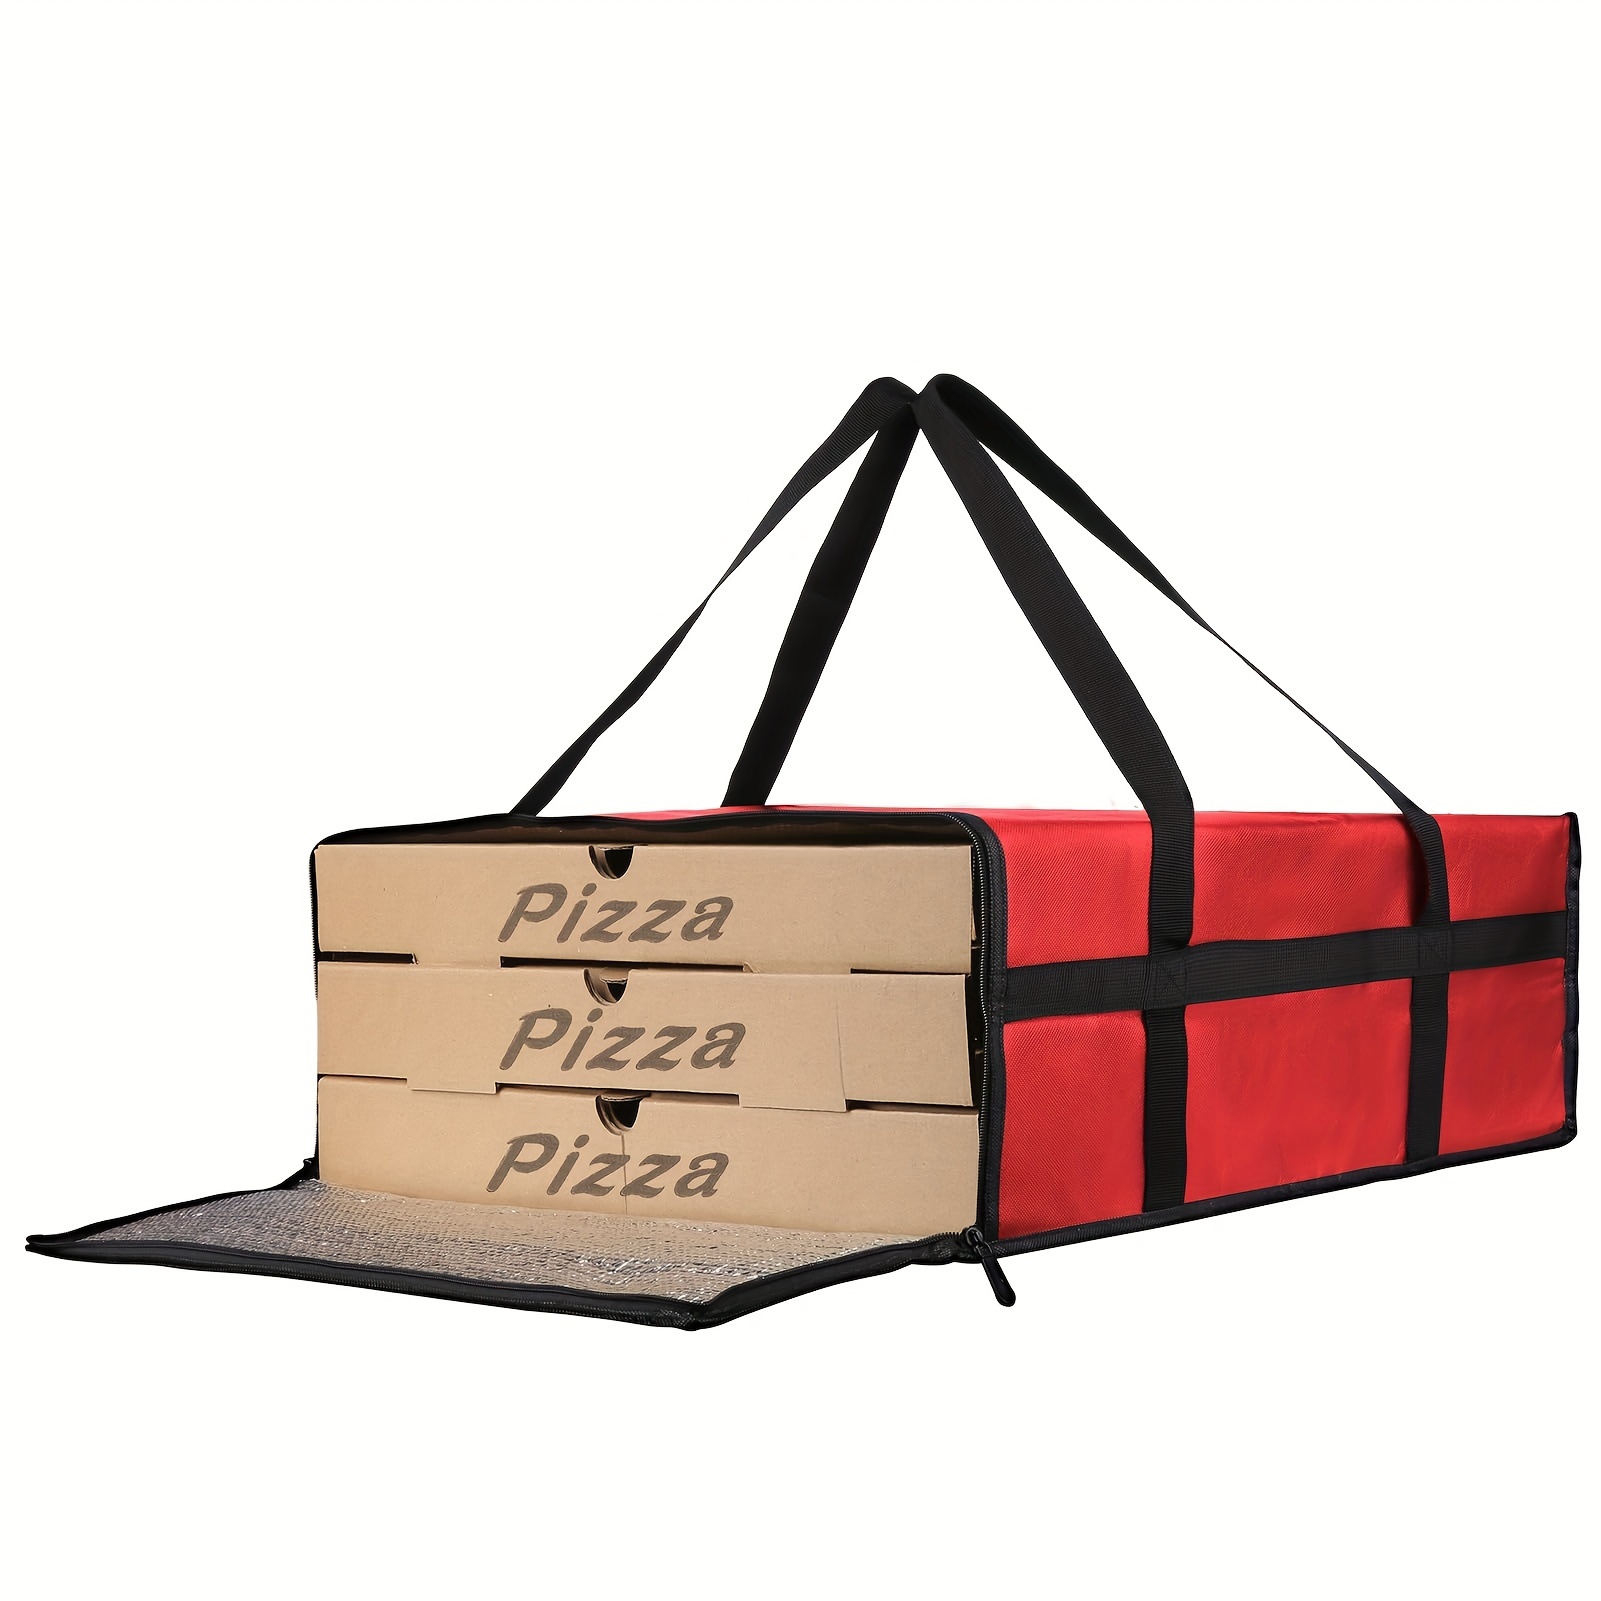 

Pizza Bag For Delivery Bag Pizza Carrier Insulated Bags Large For Deliveries, 20x20 Inch Inches 20 In Food Bag For Personal And Professional Use 18 Red